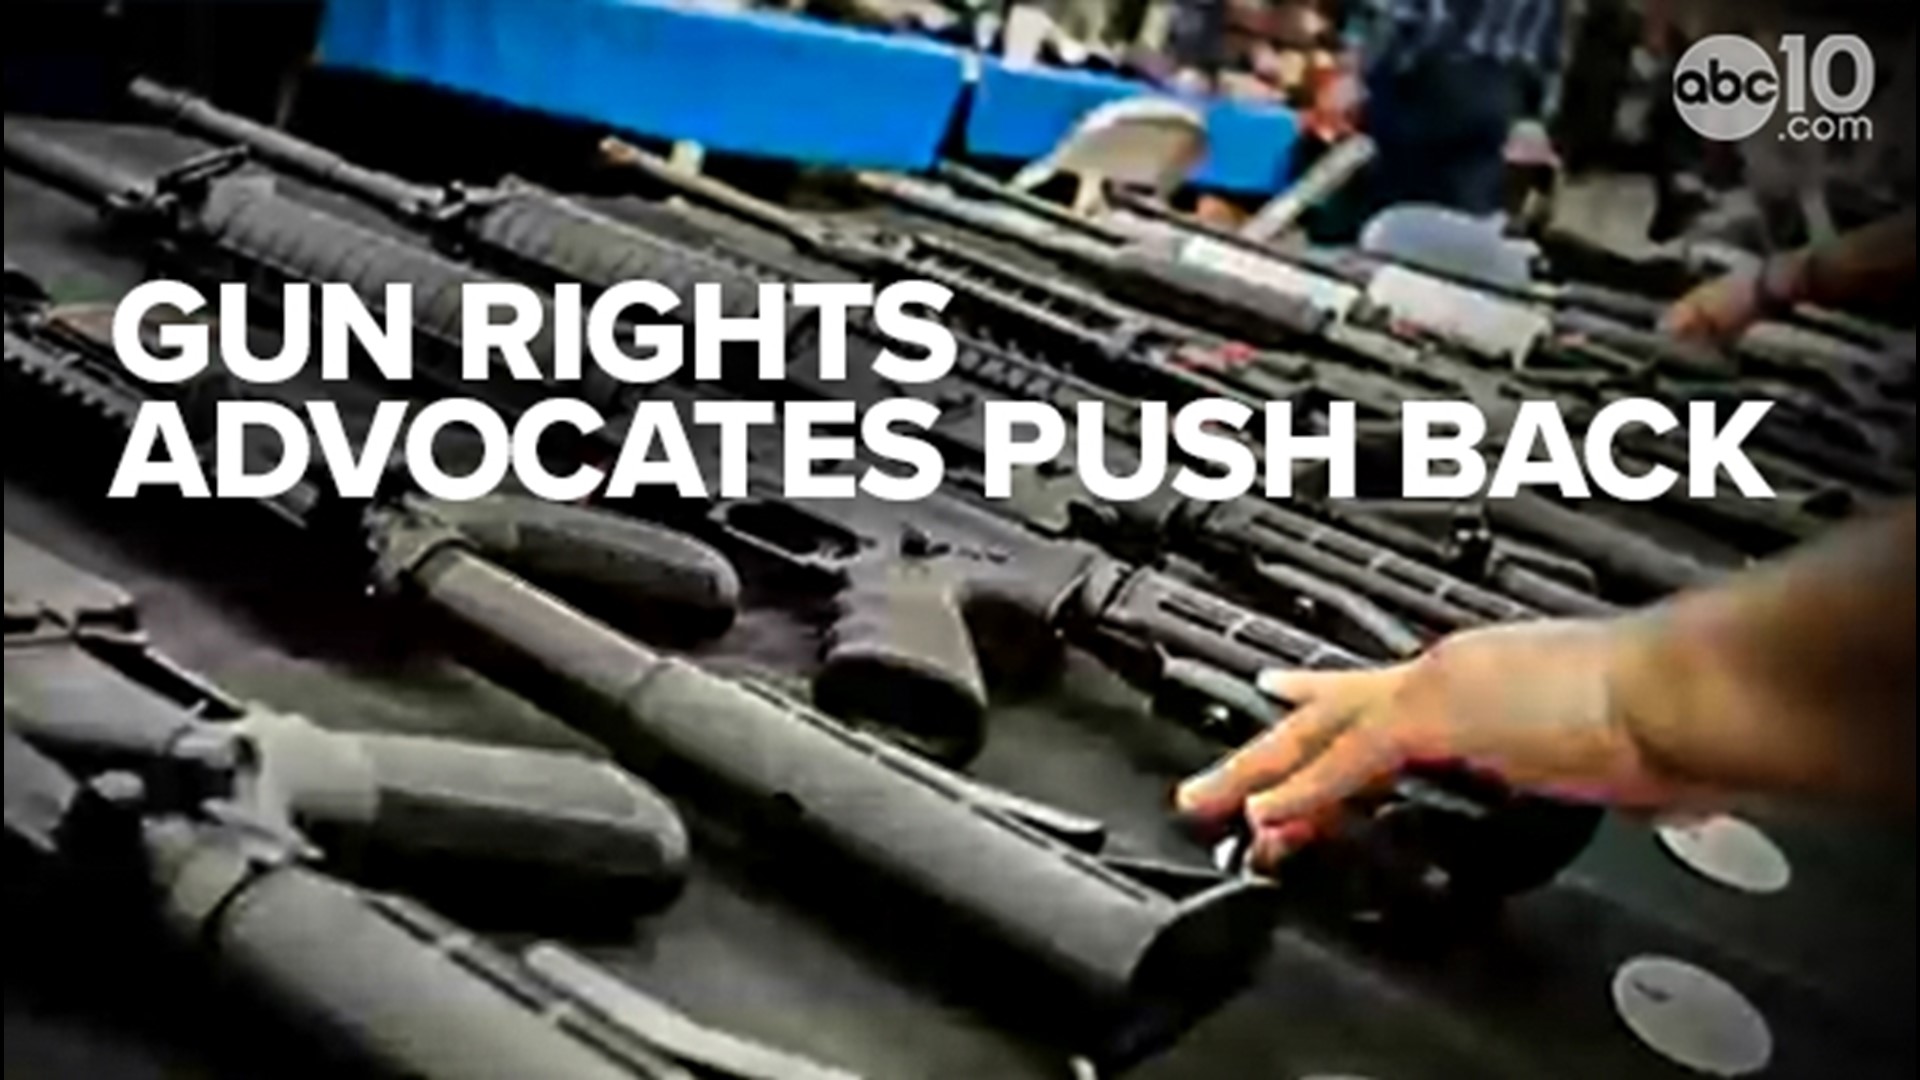 Gun store owners, distributers and manufacturers can now be sued in California if they are noncompliant with current state laws.